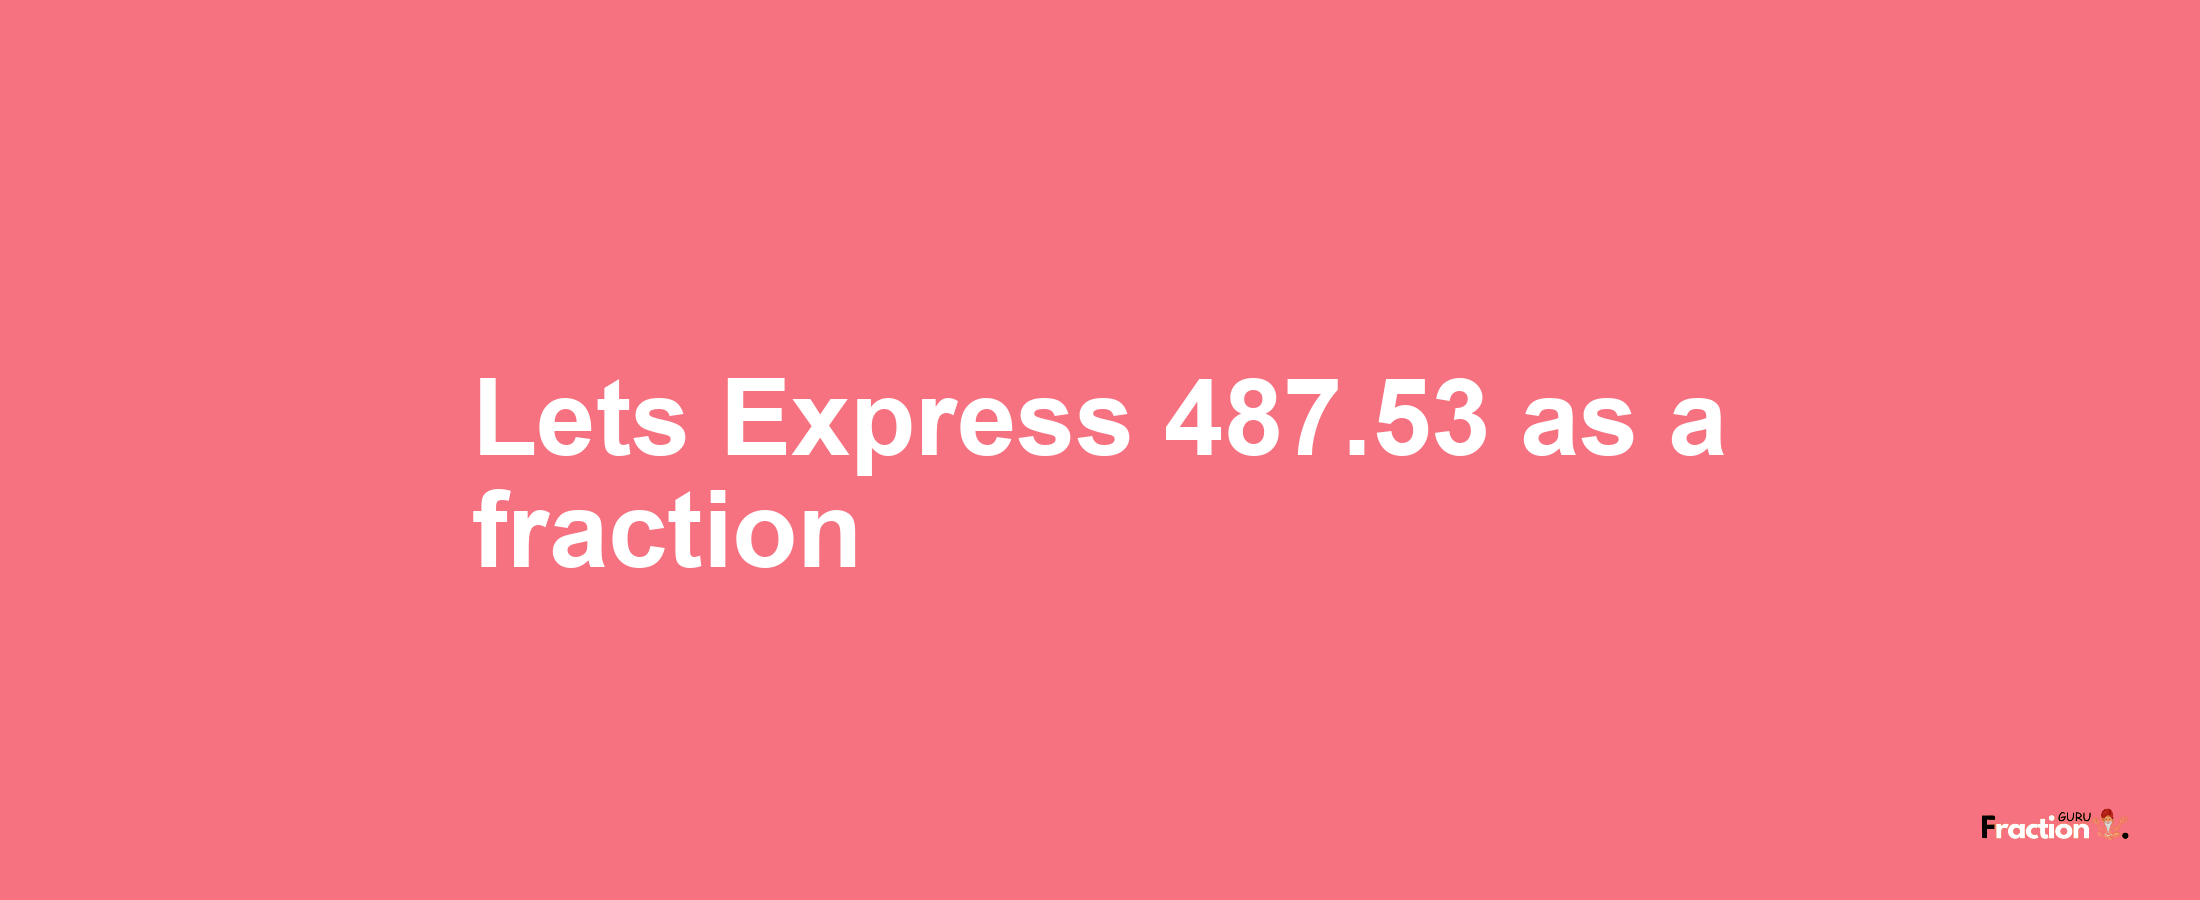 Lets Express 487.53 as afraction